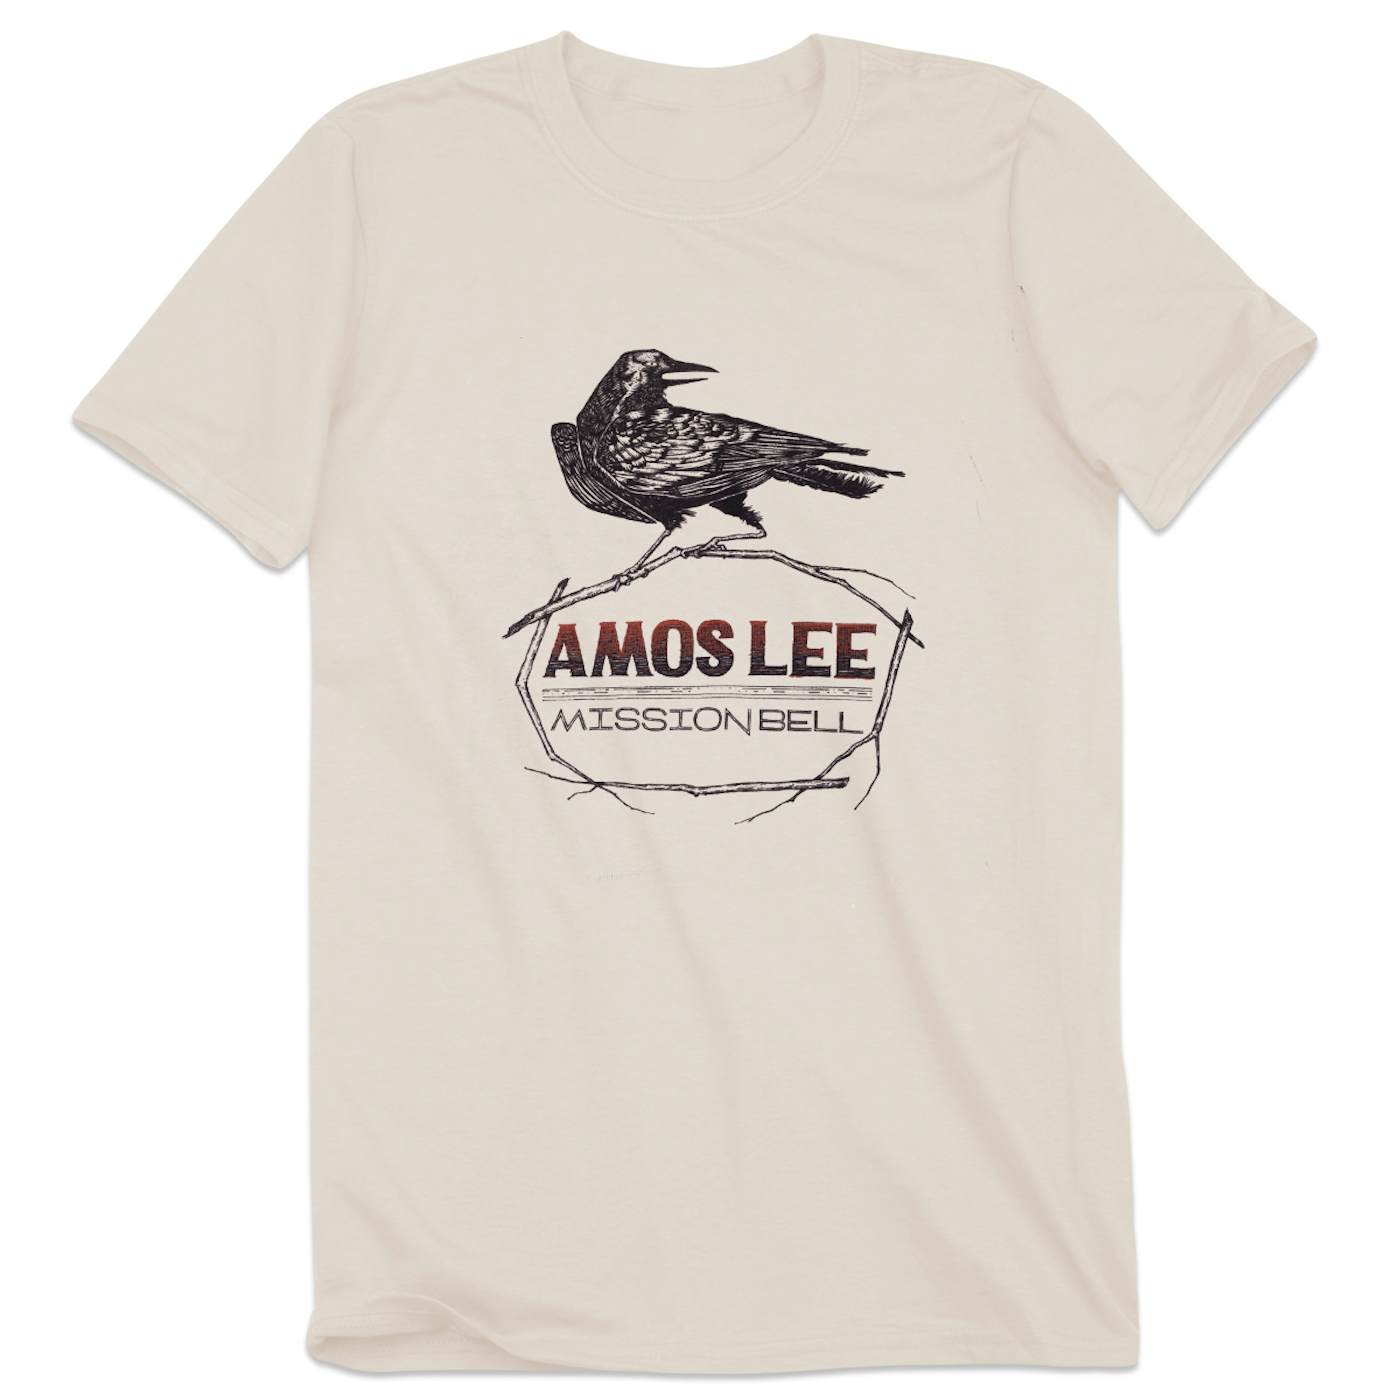 Amos Lee Mission Bell Crow T-Shirt - Cream